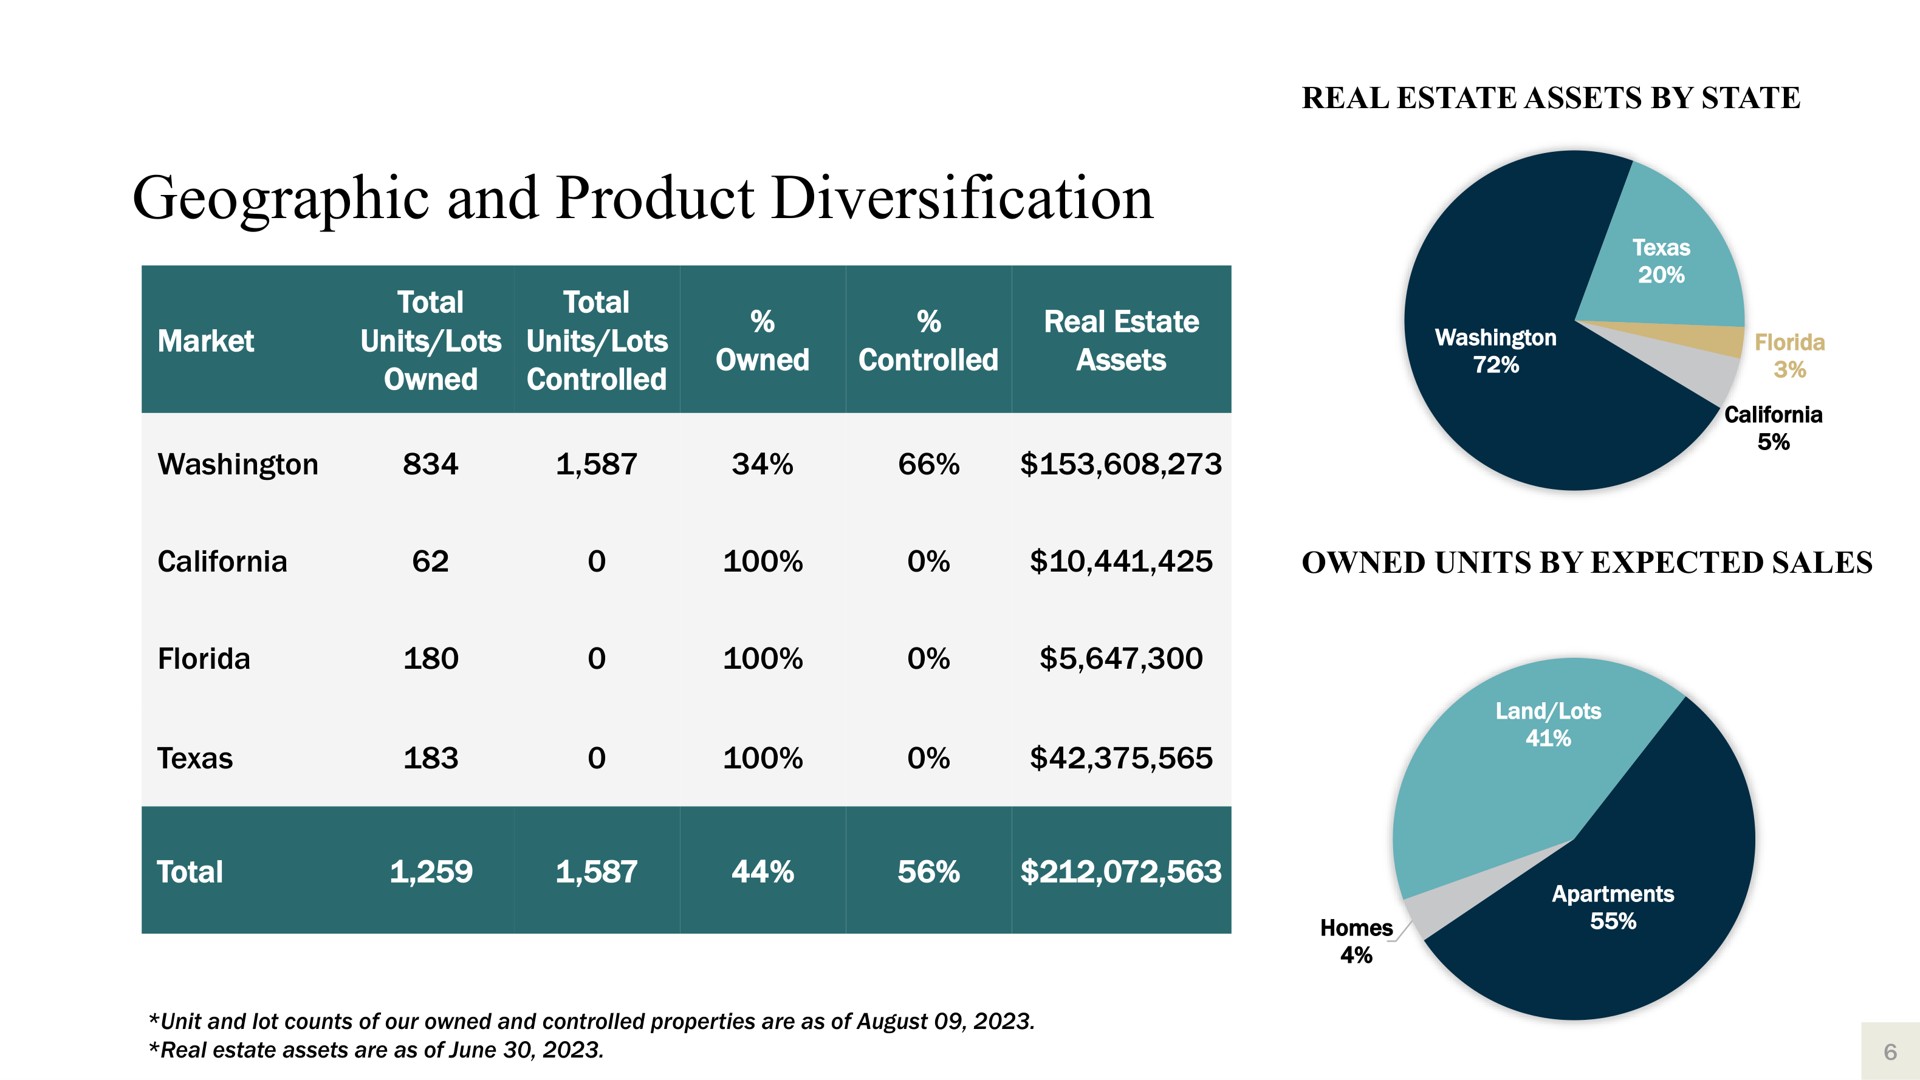 real estate assets by state geographic and product diversification market total units lots owned total units lots controlled owned controlled real estate assets owned units by expected sales total a tot | Harbor Custom Development